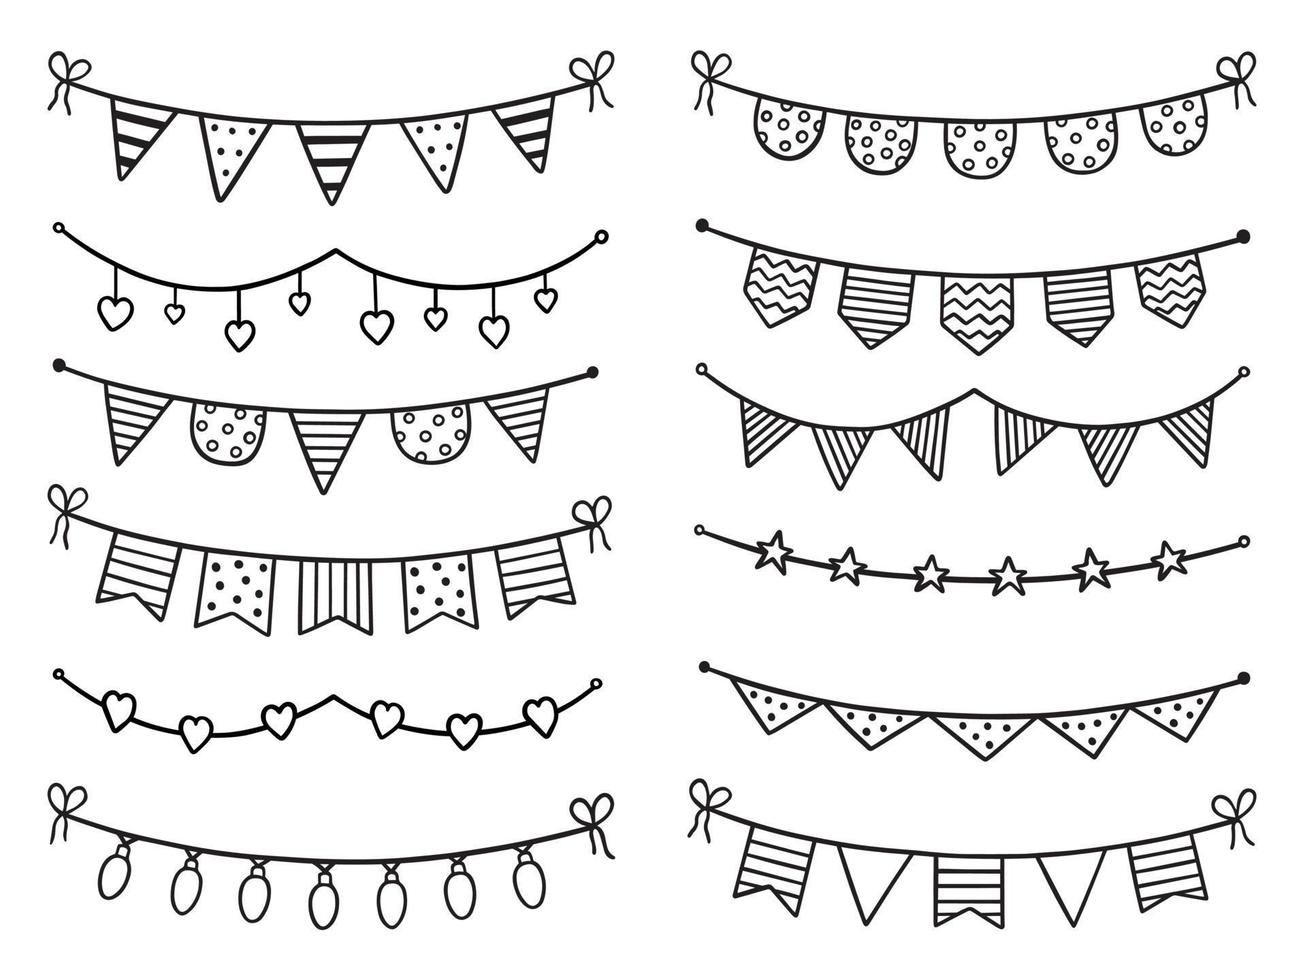 Hand drawn set of party bunting flags doodle.  Birthday garland in sketch style.  Vector illustration isolated on white background.